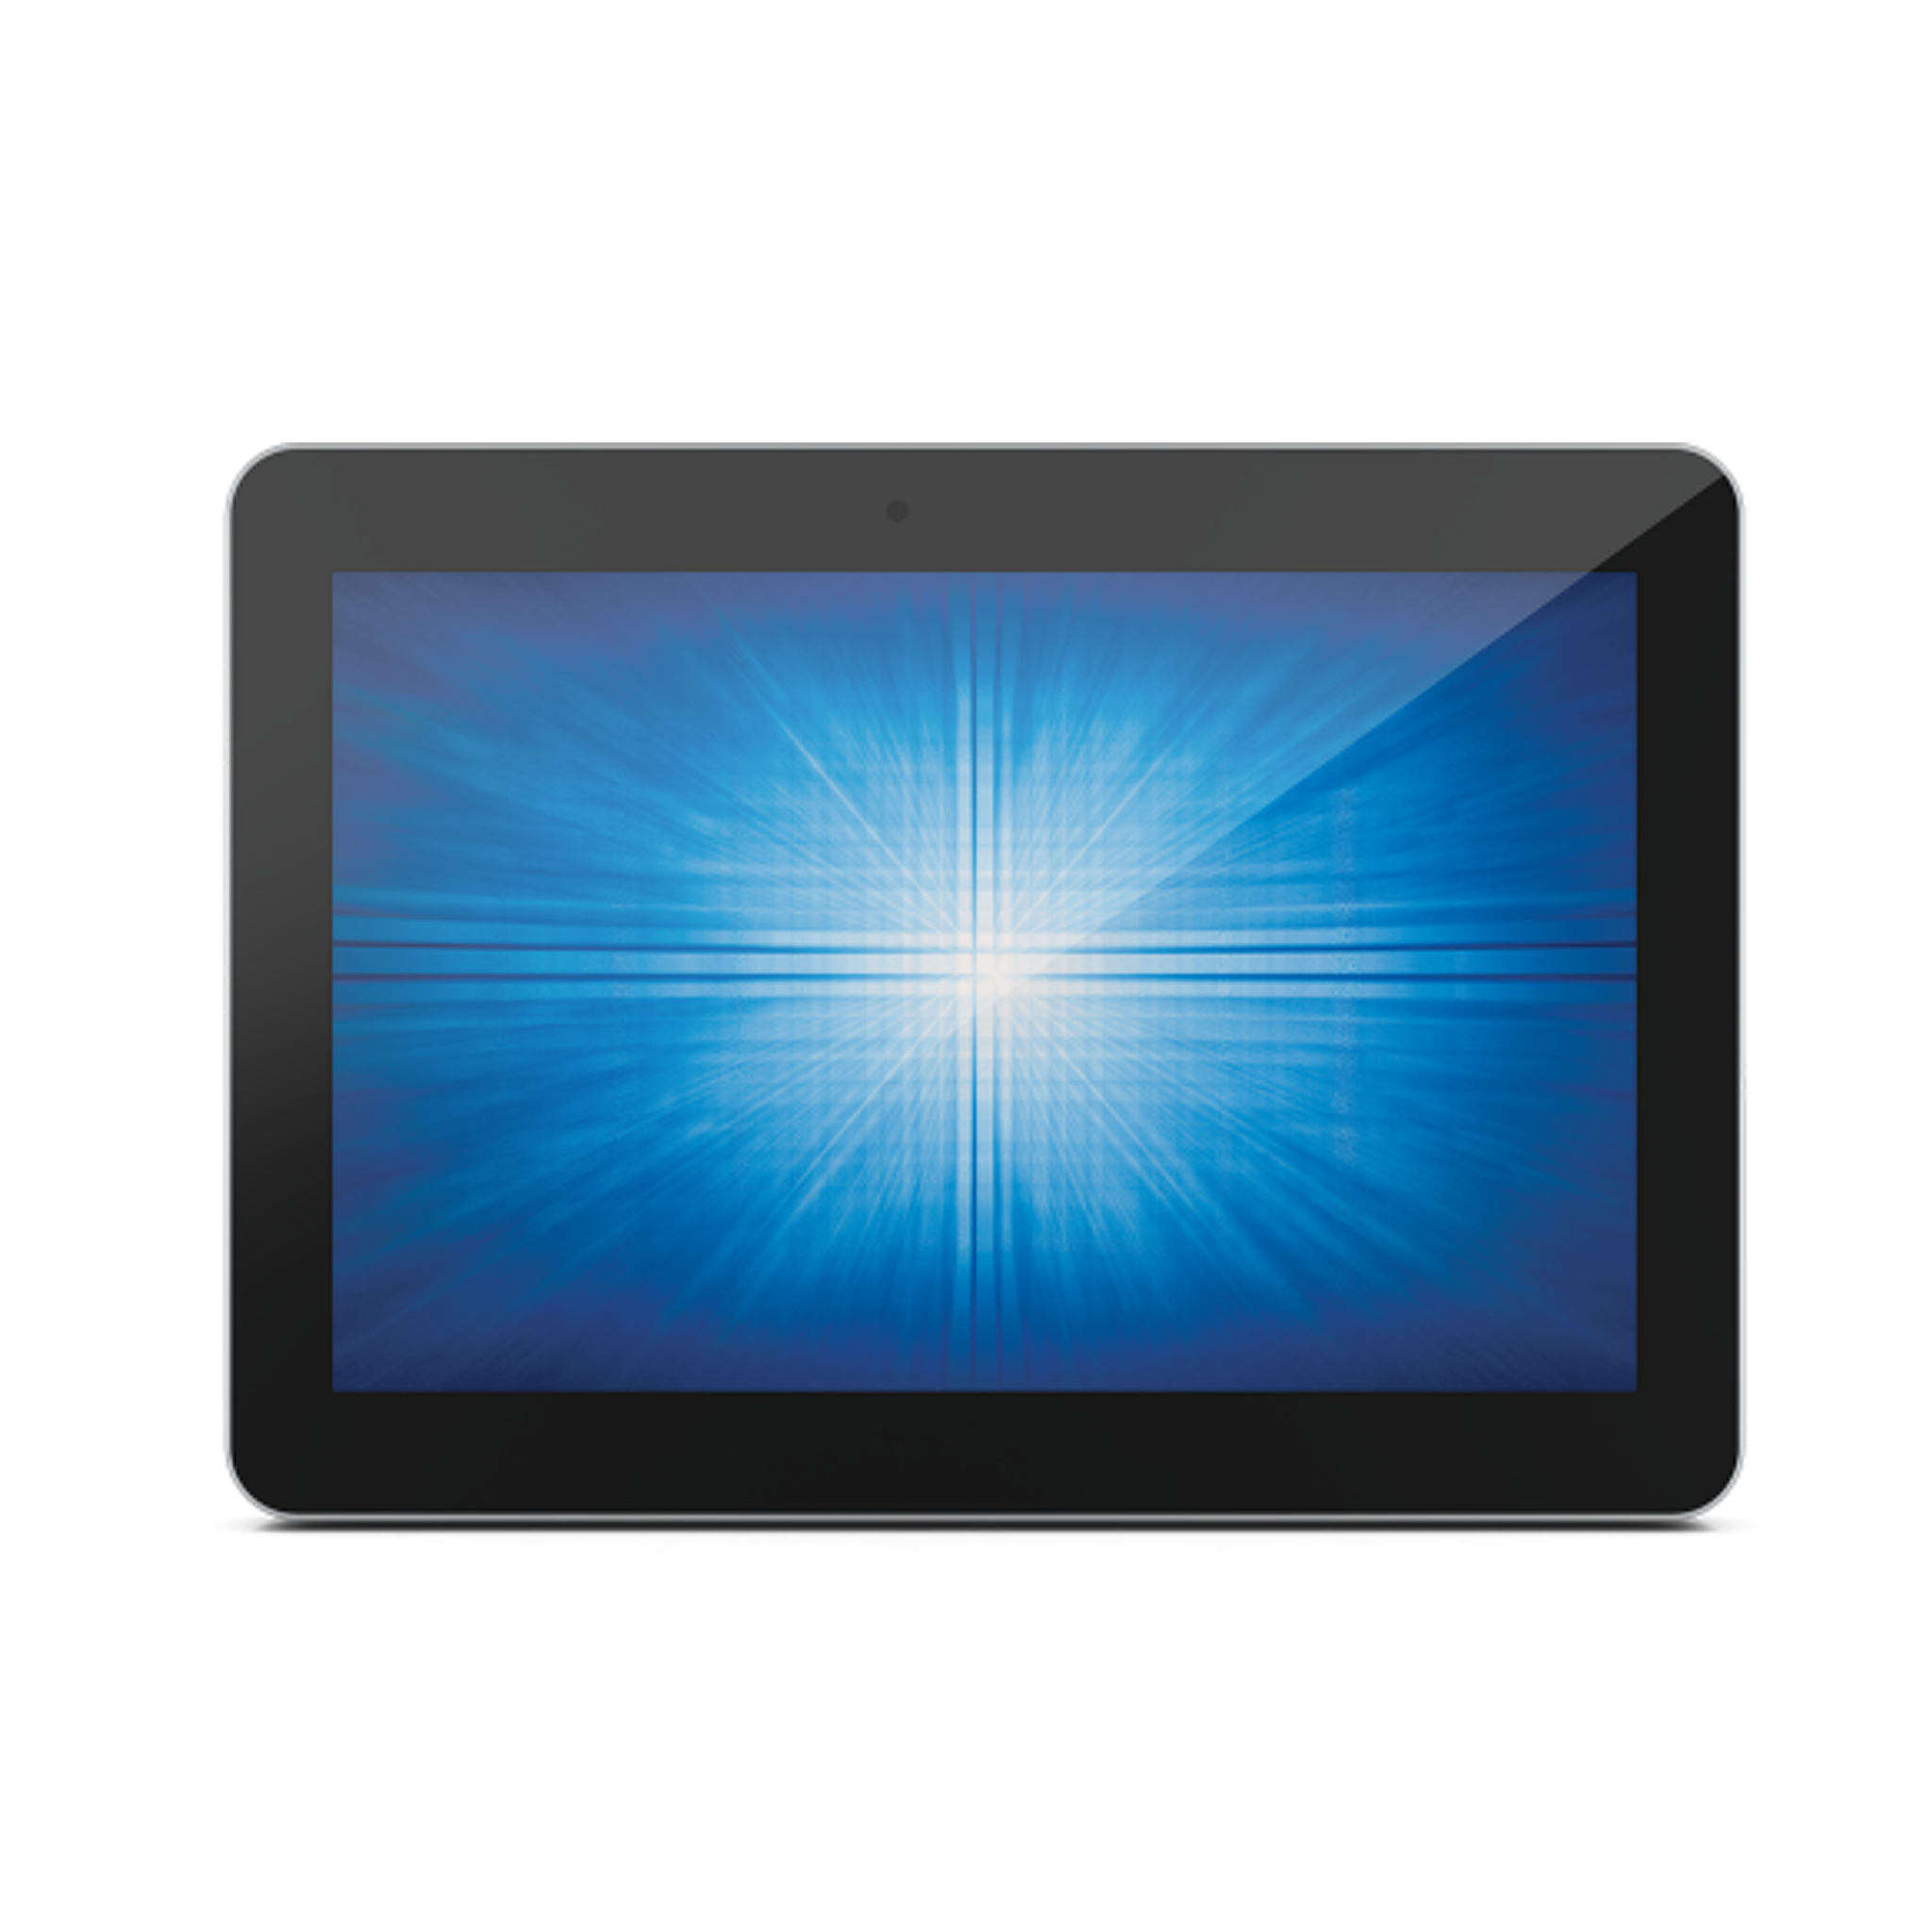 Elo STANDARD 10I3 touchscreen tablet, 25.4 cm (10''), Projected Capacitive, SSD, Android, black